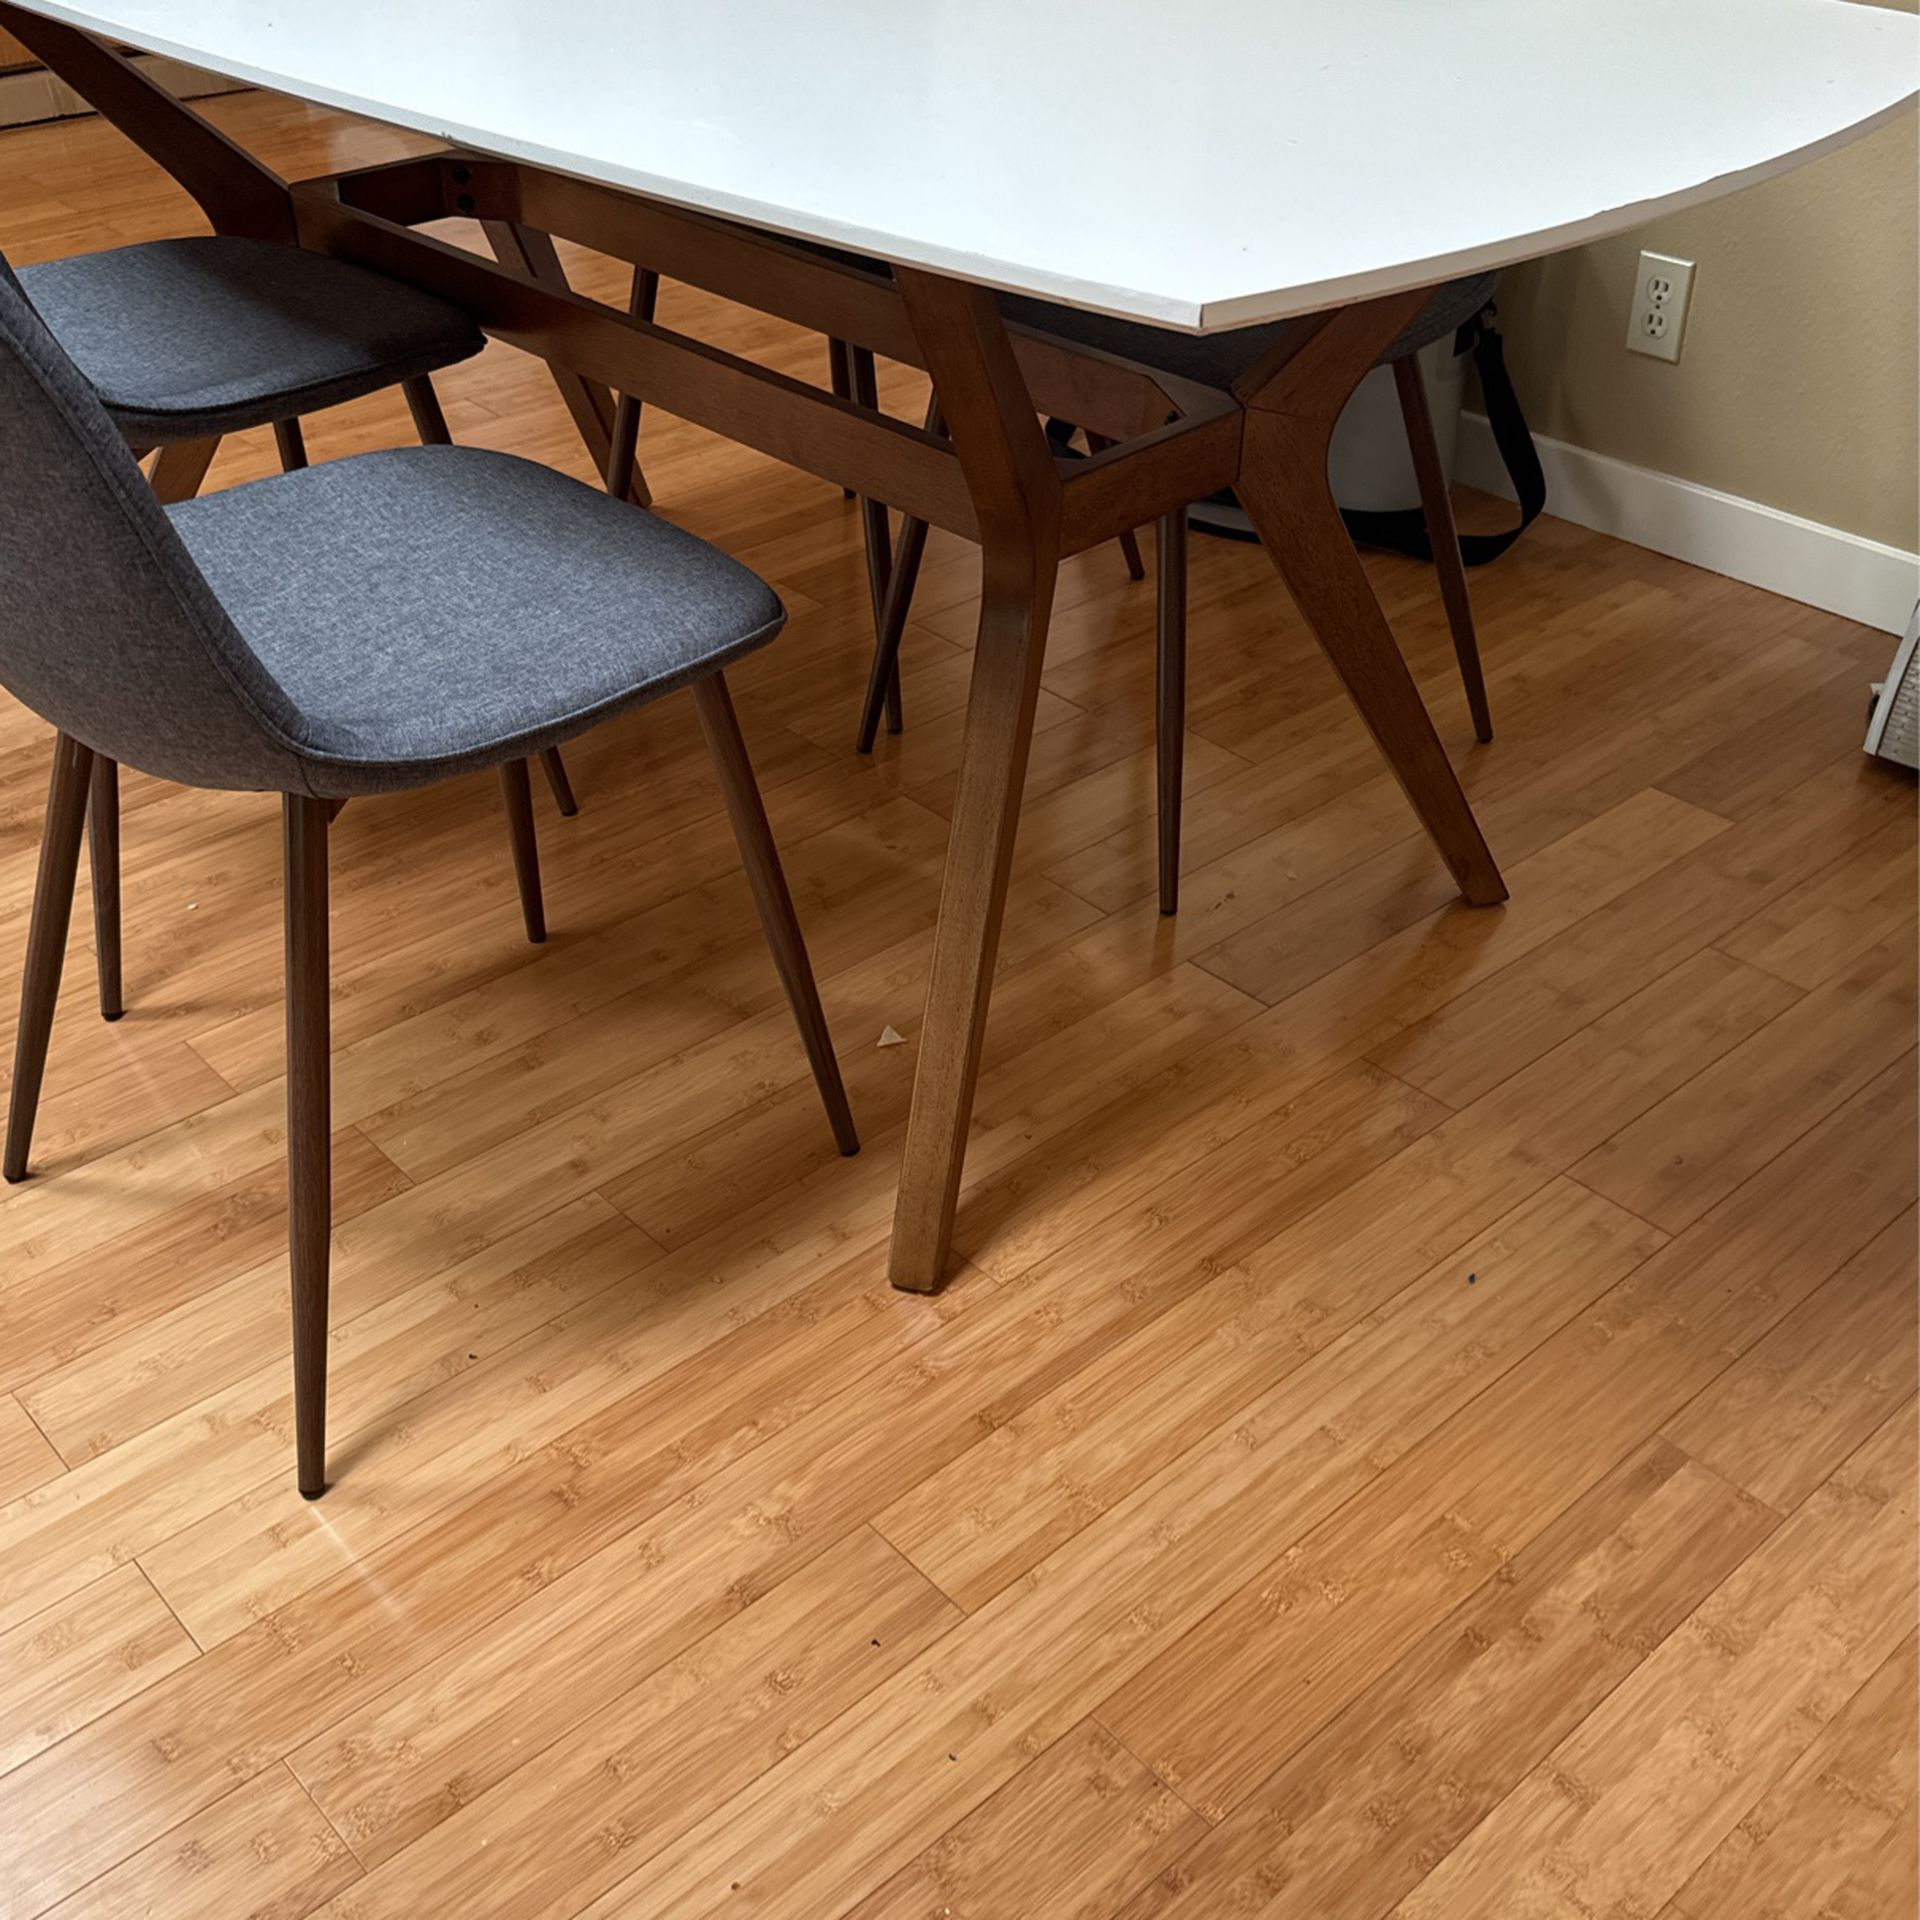 Modern Dining Room Table With 4 Chairs Pick Up Thursday In East Vancouver 